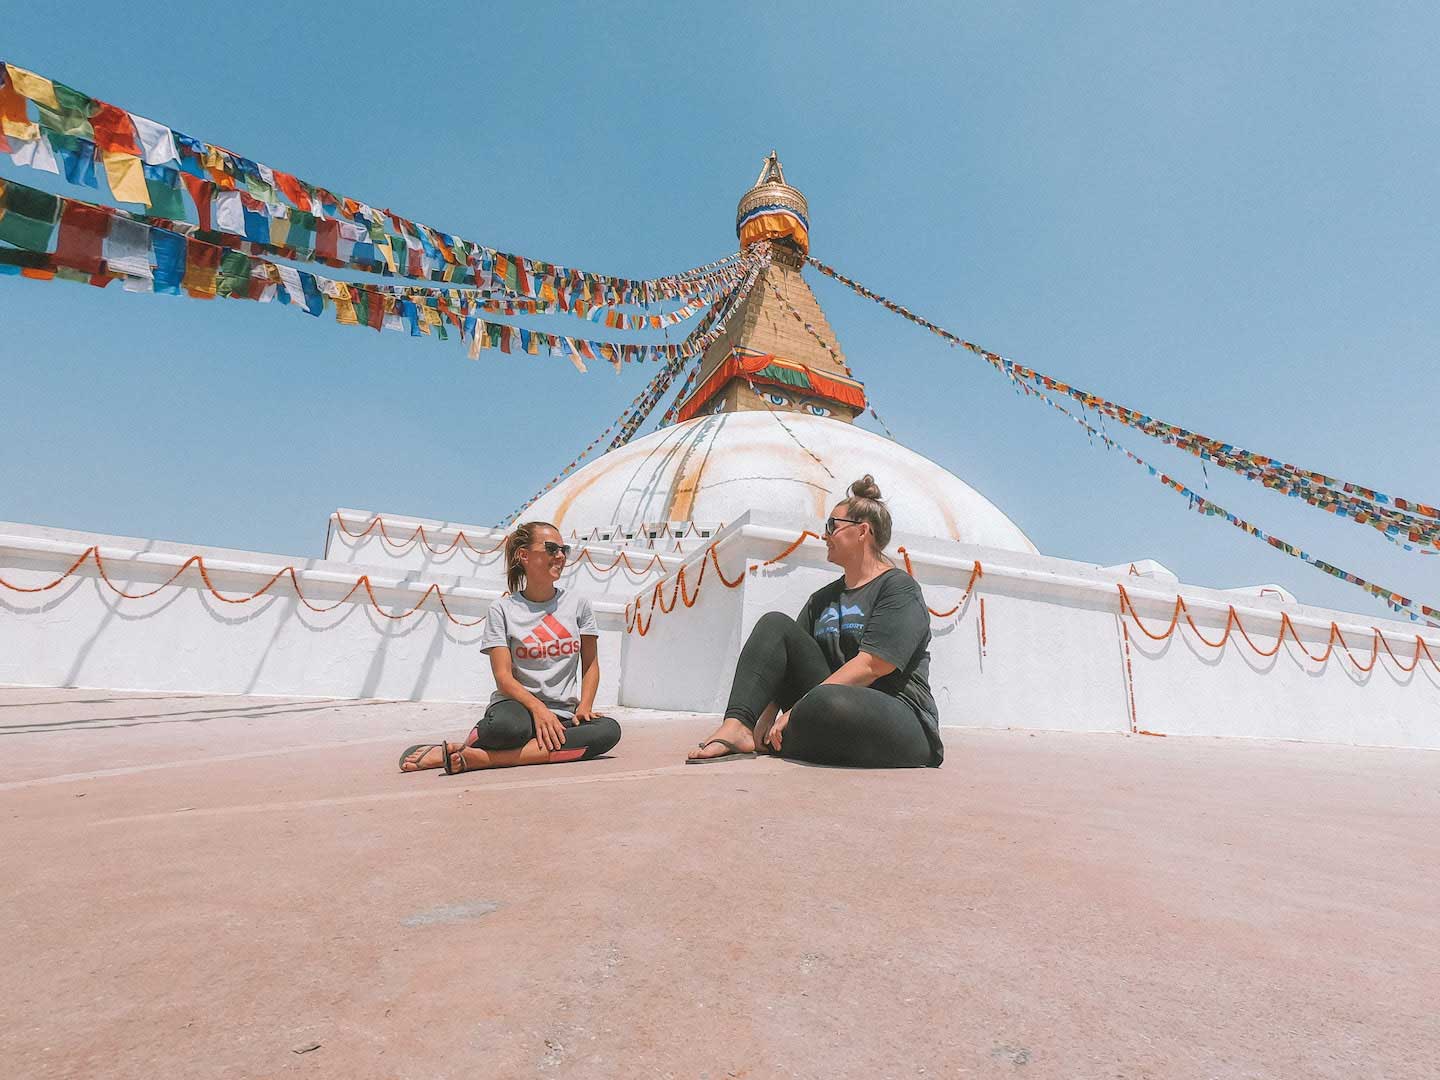 Sitting on the ground, in front of a large white stupa in Kathmandu, Nepal